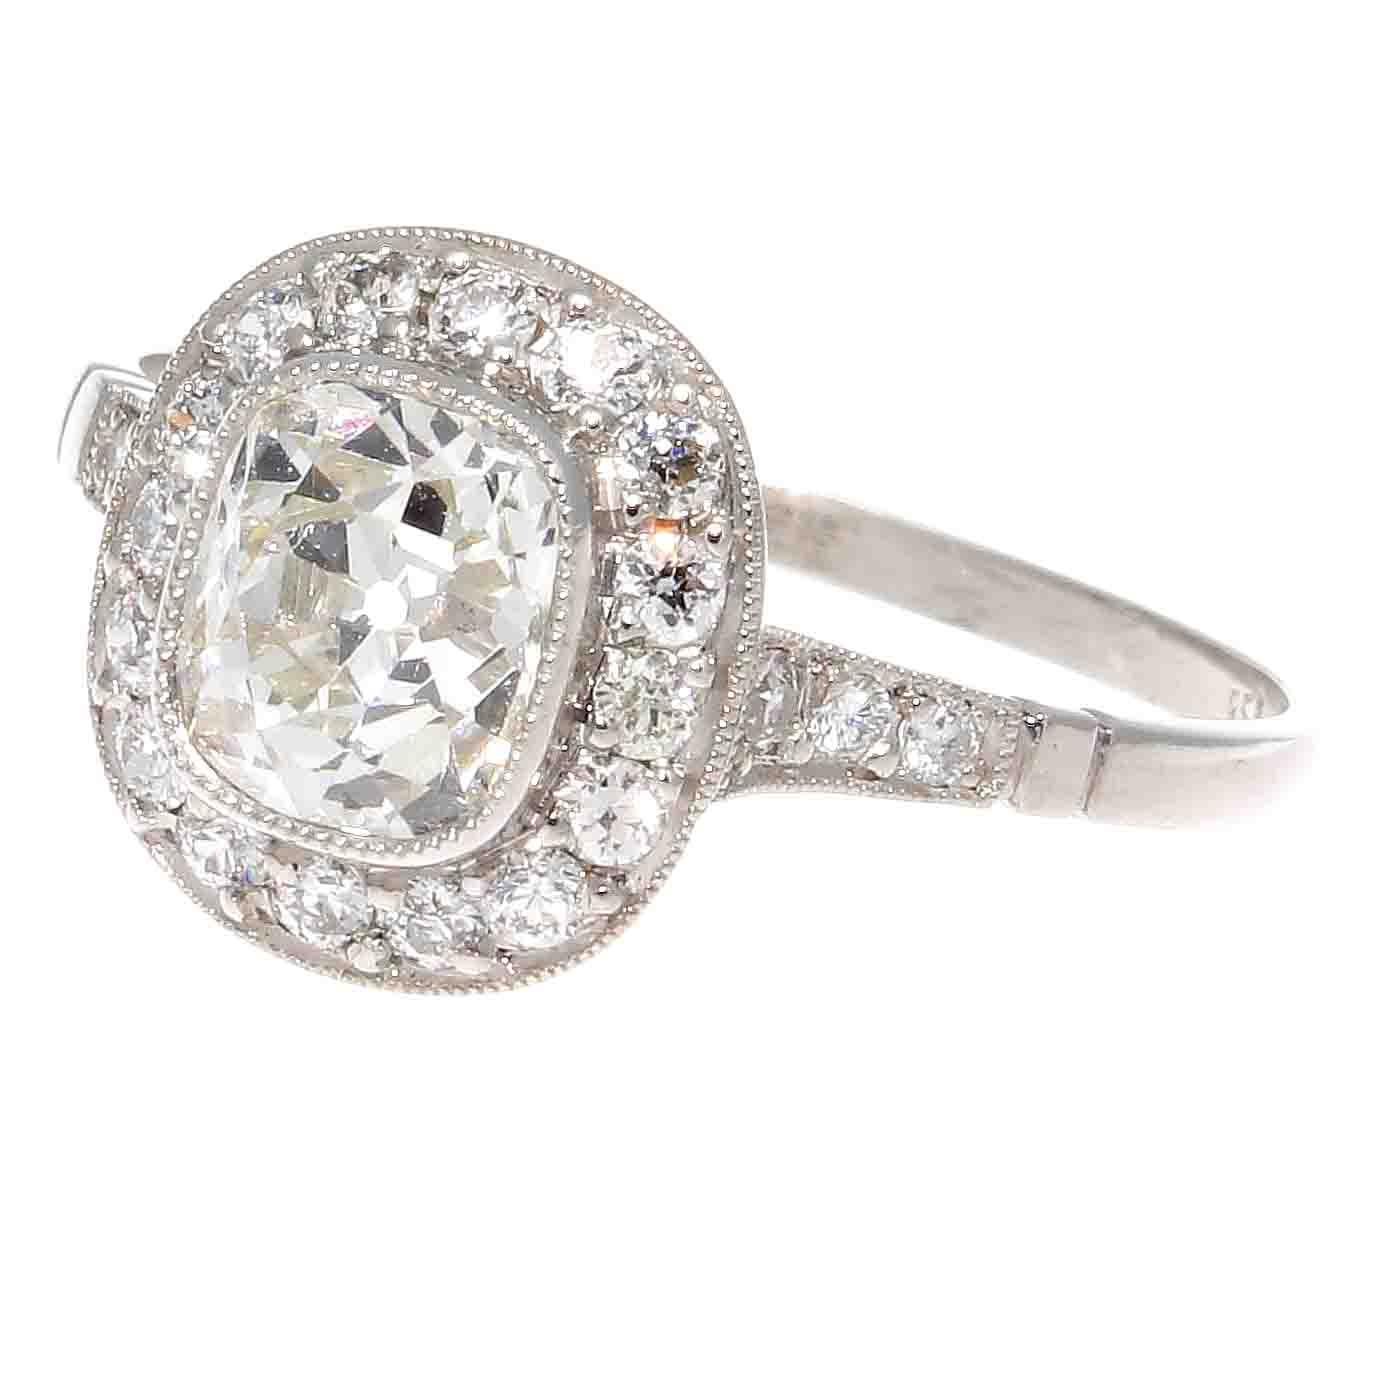 Tradition that lasts as long as a loving marriage. Featuring a 1.03 carat old mine cut diamond that is J color, VS2 clarity. The hand crafted platinum ring features a halo of near colorless diamonds.

Ring size 5 and can easily be resized to fit, if